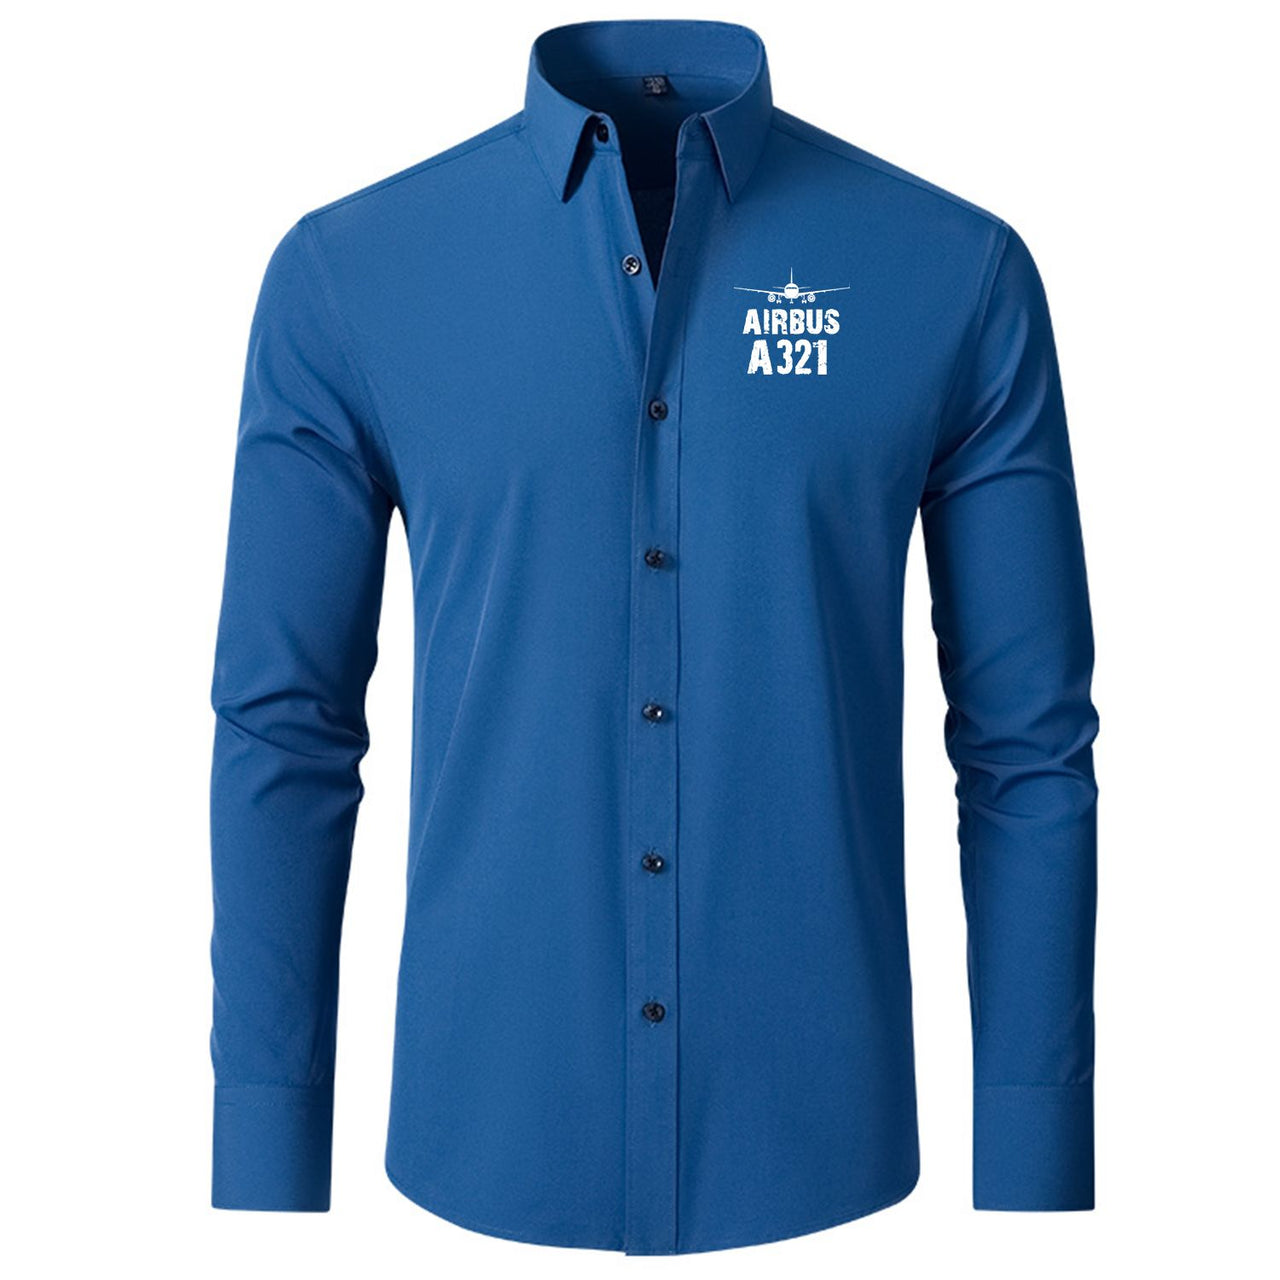 Airbus A321 & Plane Designed Long Sleeve Shirts